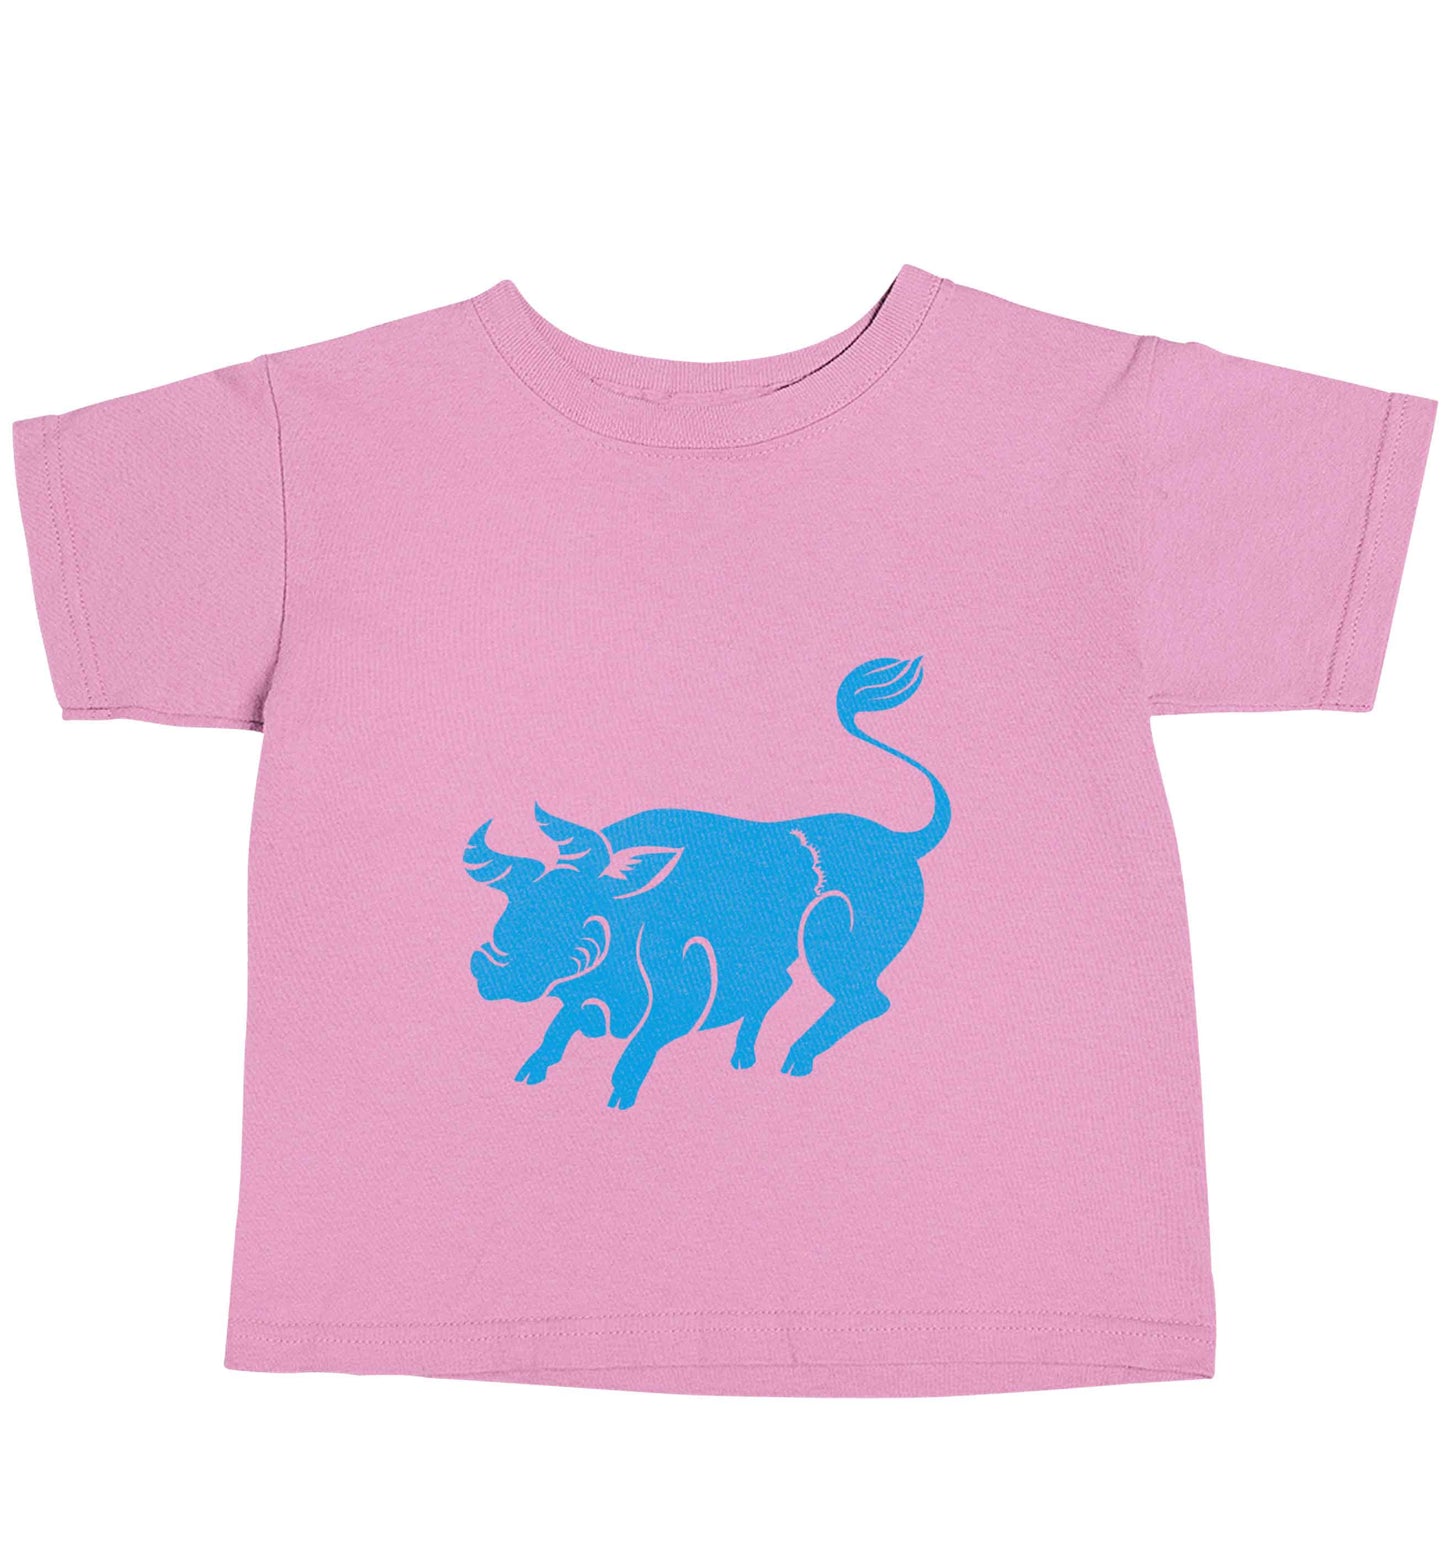 Blue ox light pink baby toddler Tshirt 2 Years